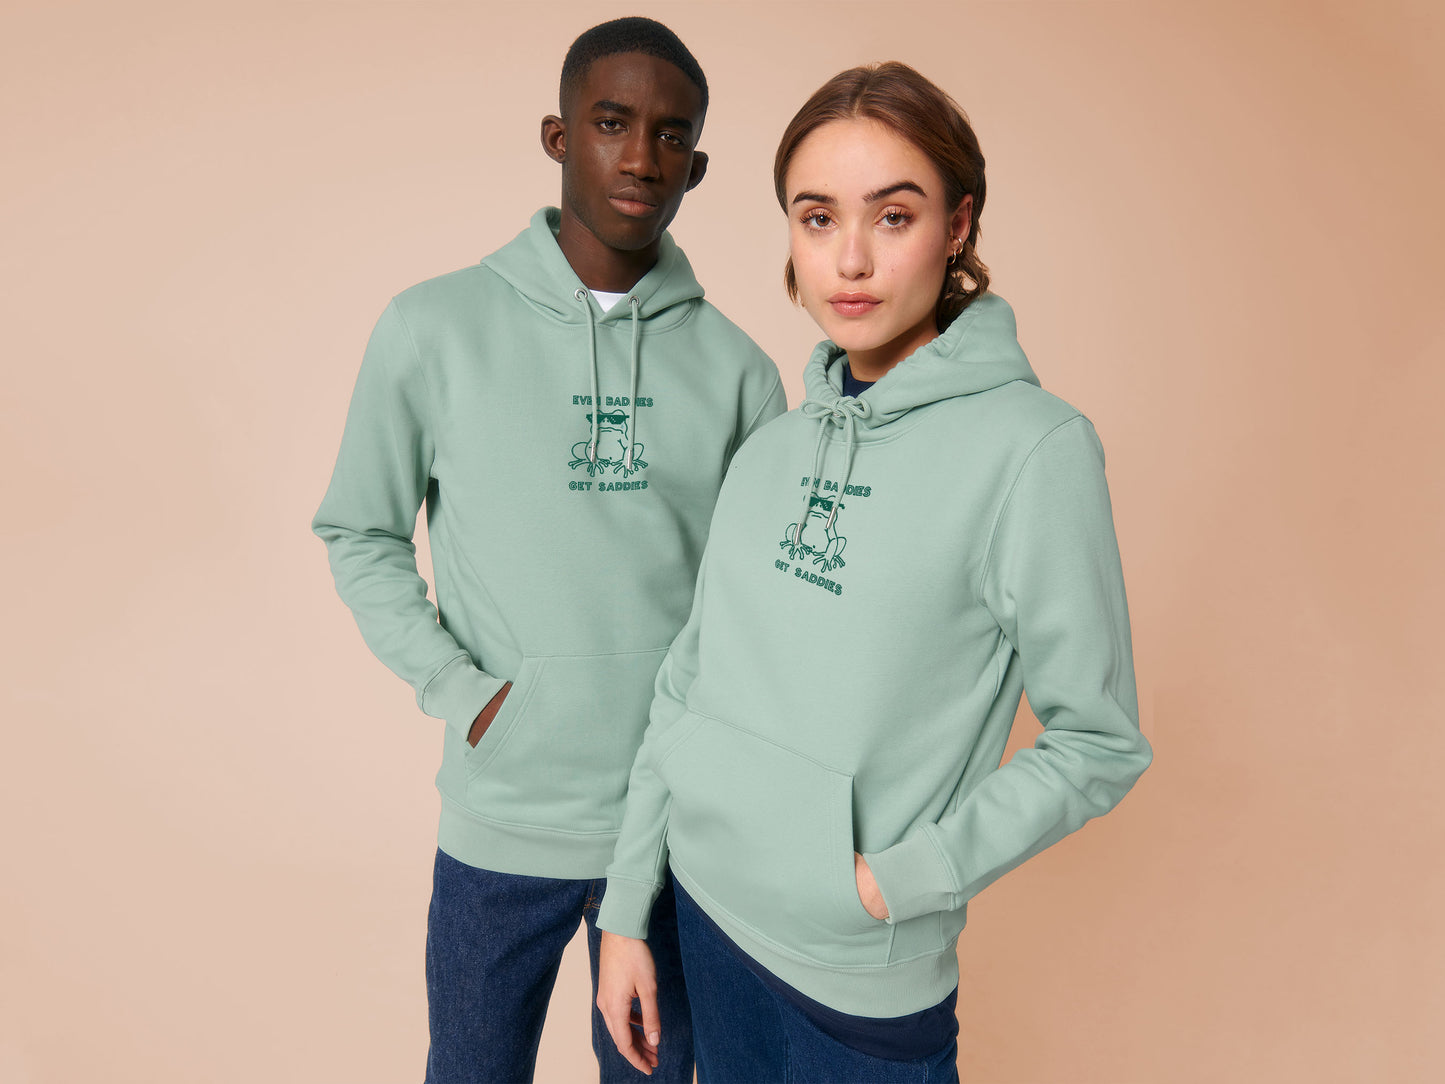 Woman and man wearing a long sleeved green hoodie with an embroidered green design of a frog in thug life sunglasses crying with a single tear and the words Even Baddies Get Saddies